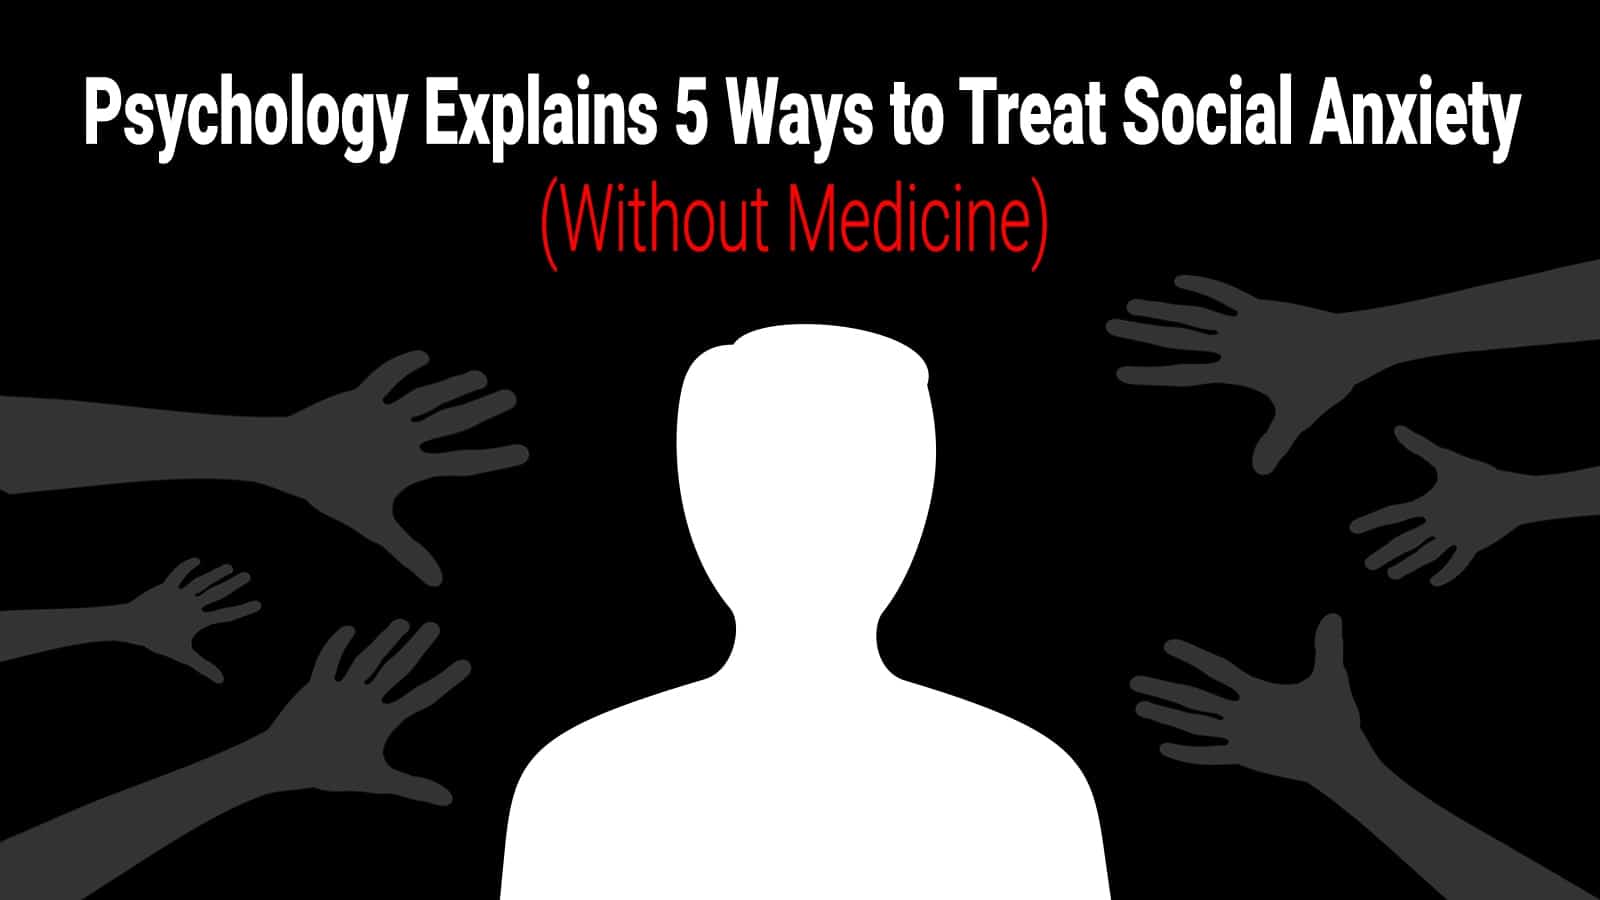 Psychology Explains 5 Ways to Treat Social Anxiety (Without Medicine)